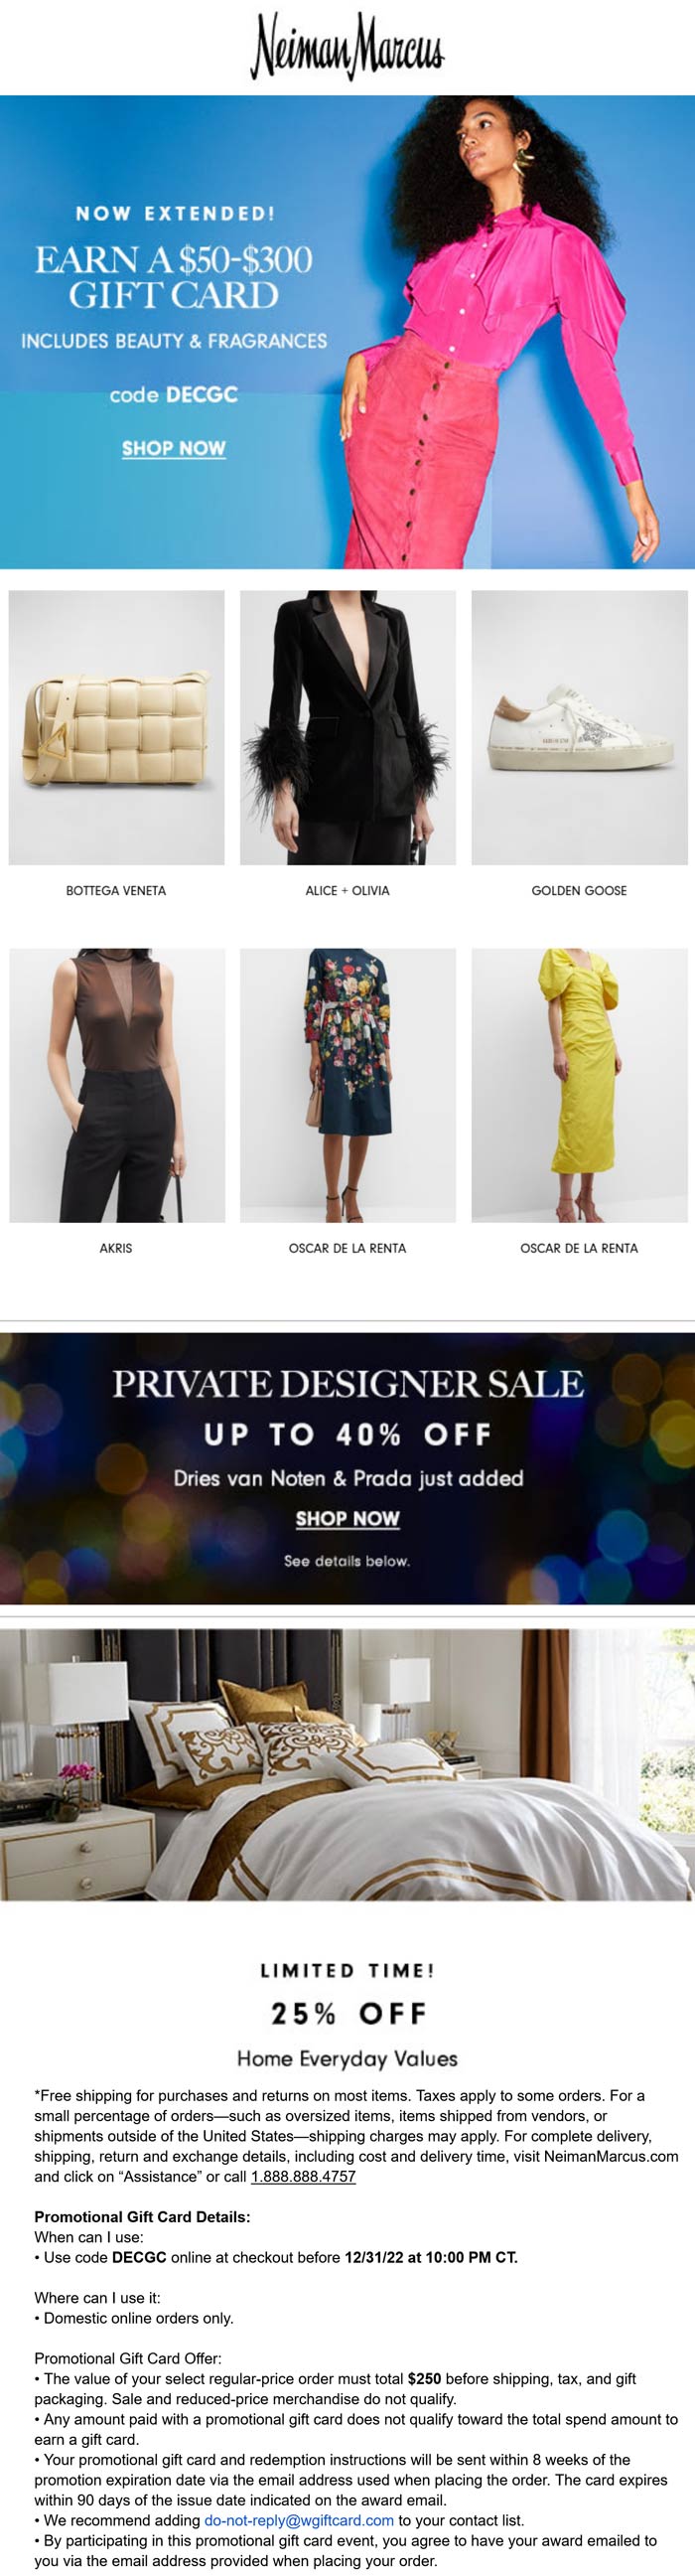 Neiman Marcus coupons & promo code for [February 2023]